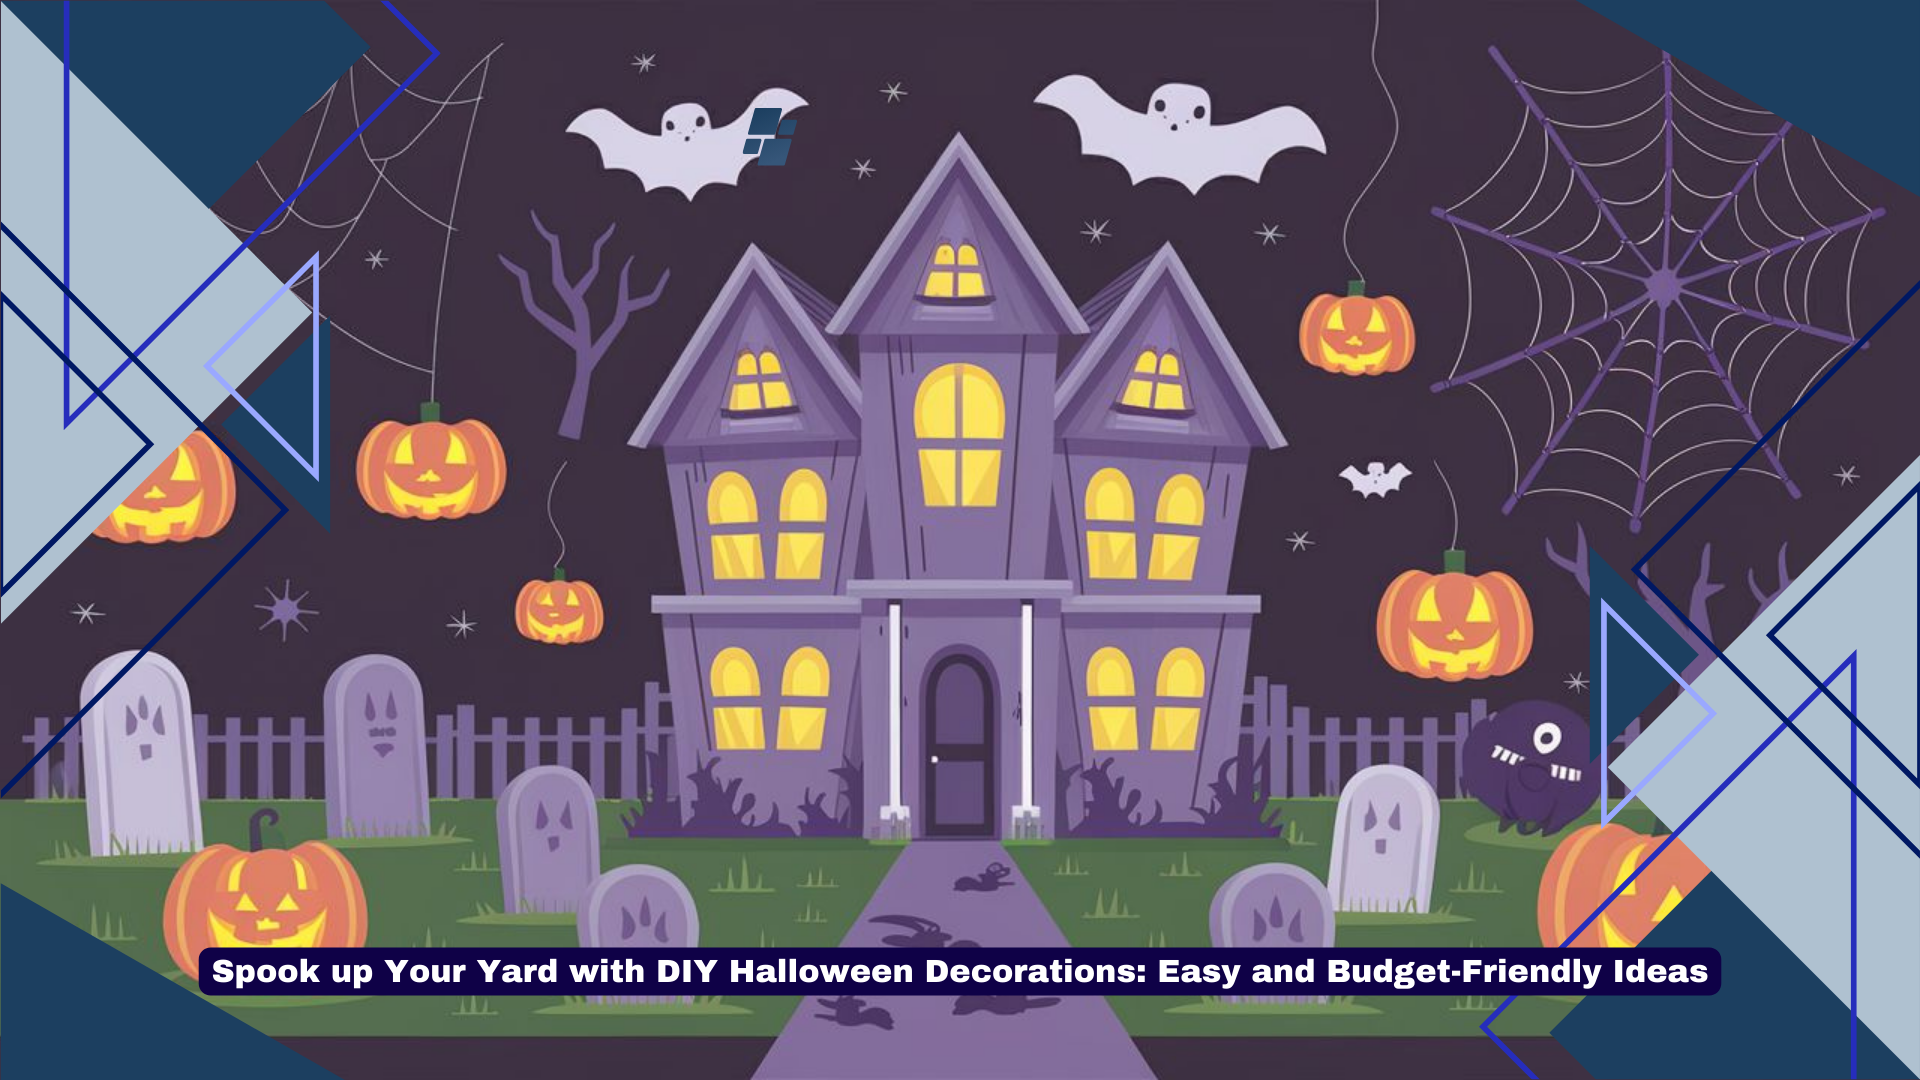 Spook up Your Yard with DIY Halloween Decorations Easy and Budget-Friendly Ideas